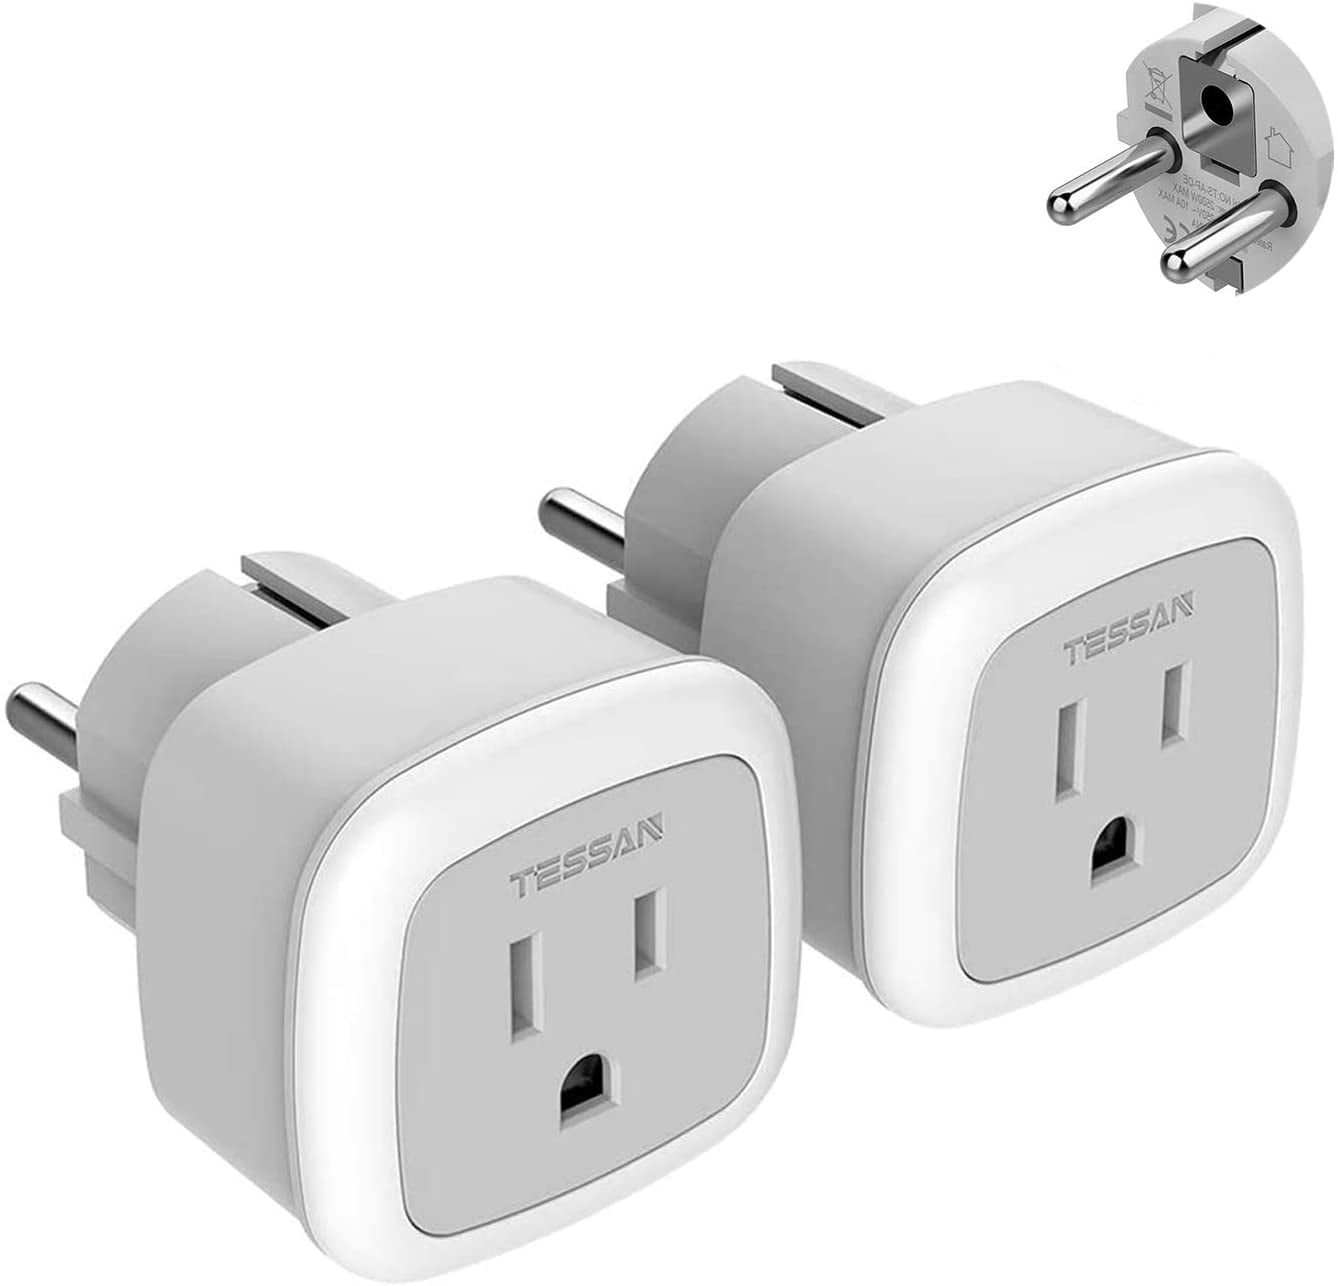 Camera Chargers Travel 3 Pack- Type E/F Schuko Power Plug Adapter by OREI with 2 USA Inputs US-9 France Safe Grounded Use with Cell Phones and More Laptop Germany CPAP 